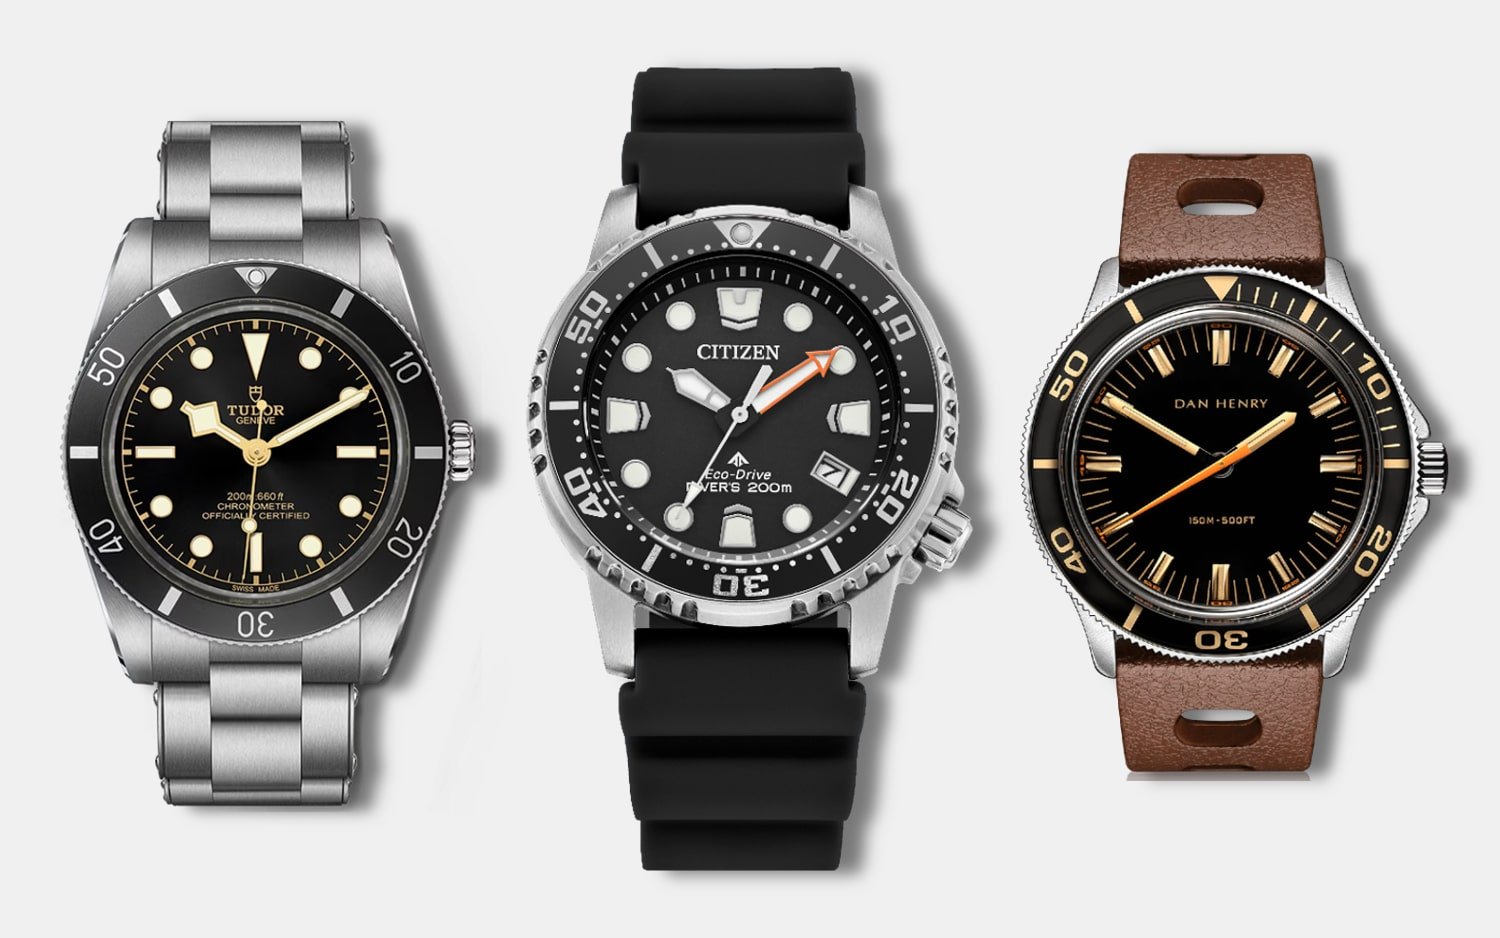 37mm Dive Watches